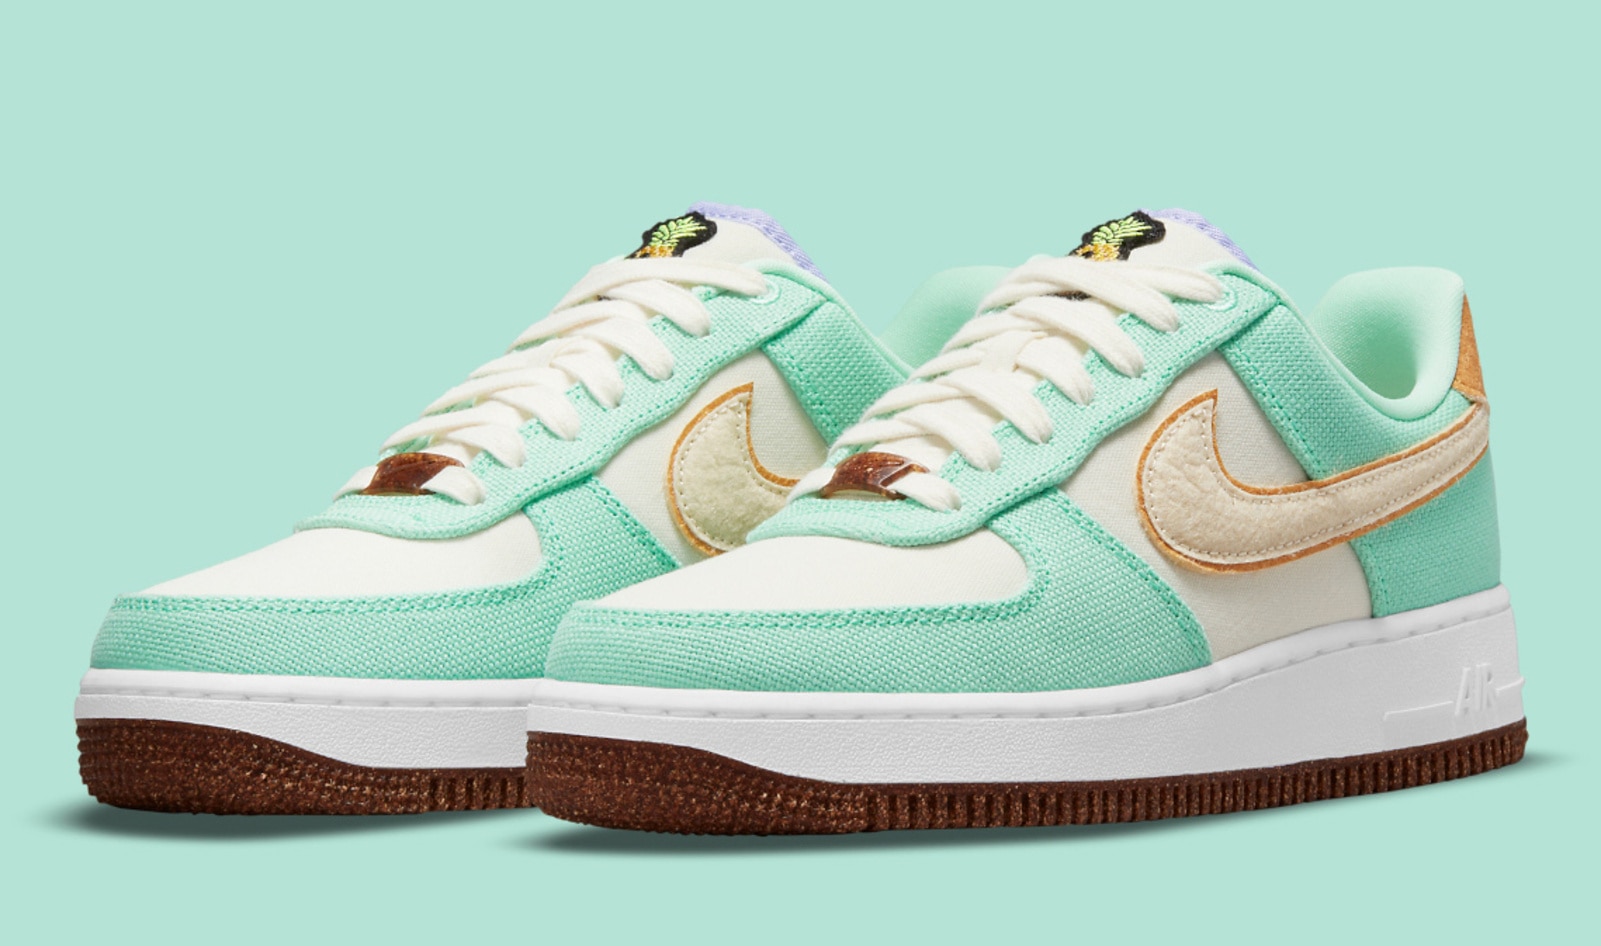 Nike's Iconic Air Force Ones Get a Vegan Pineapple Leather Makeover